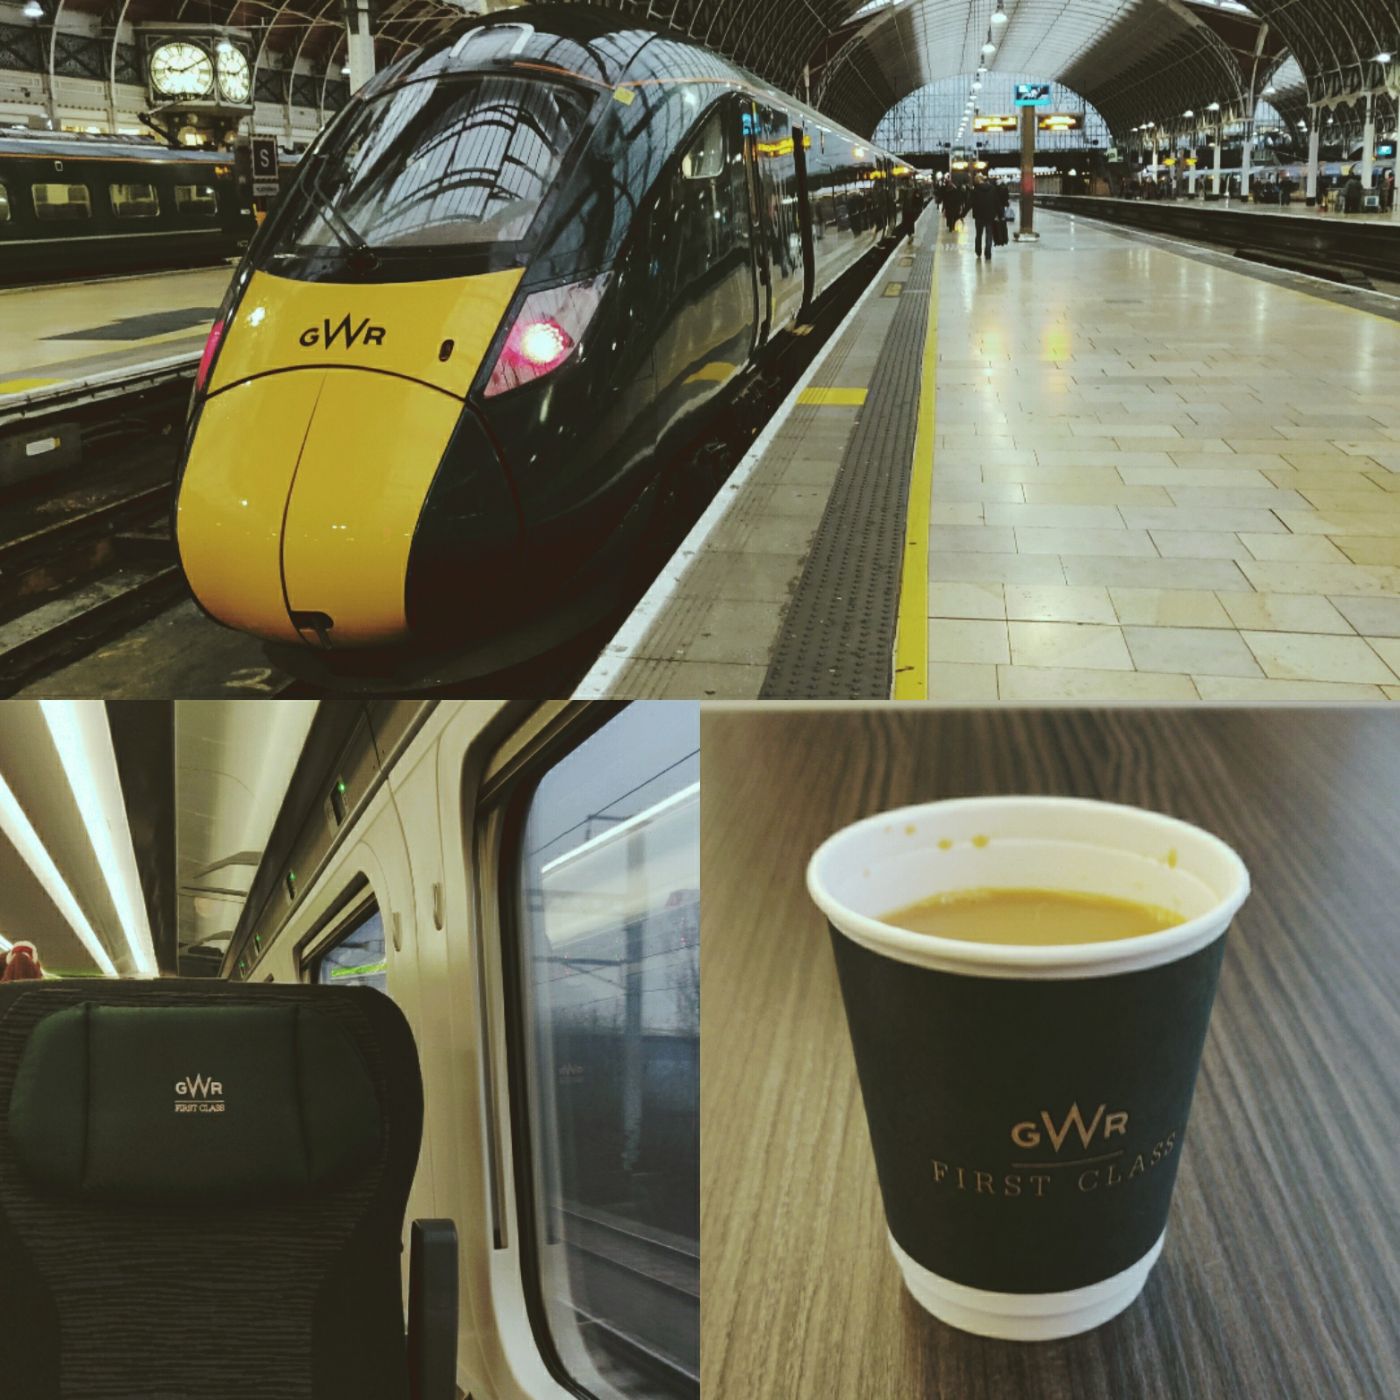 GWR train inside and out at London Paddington